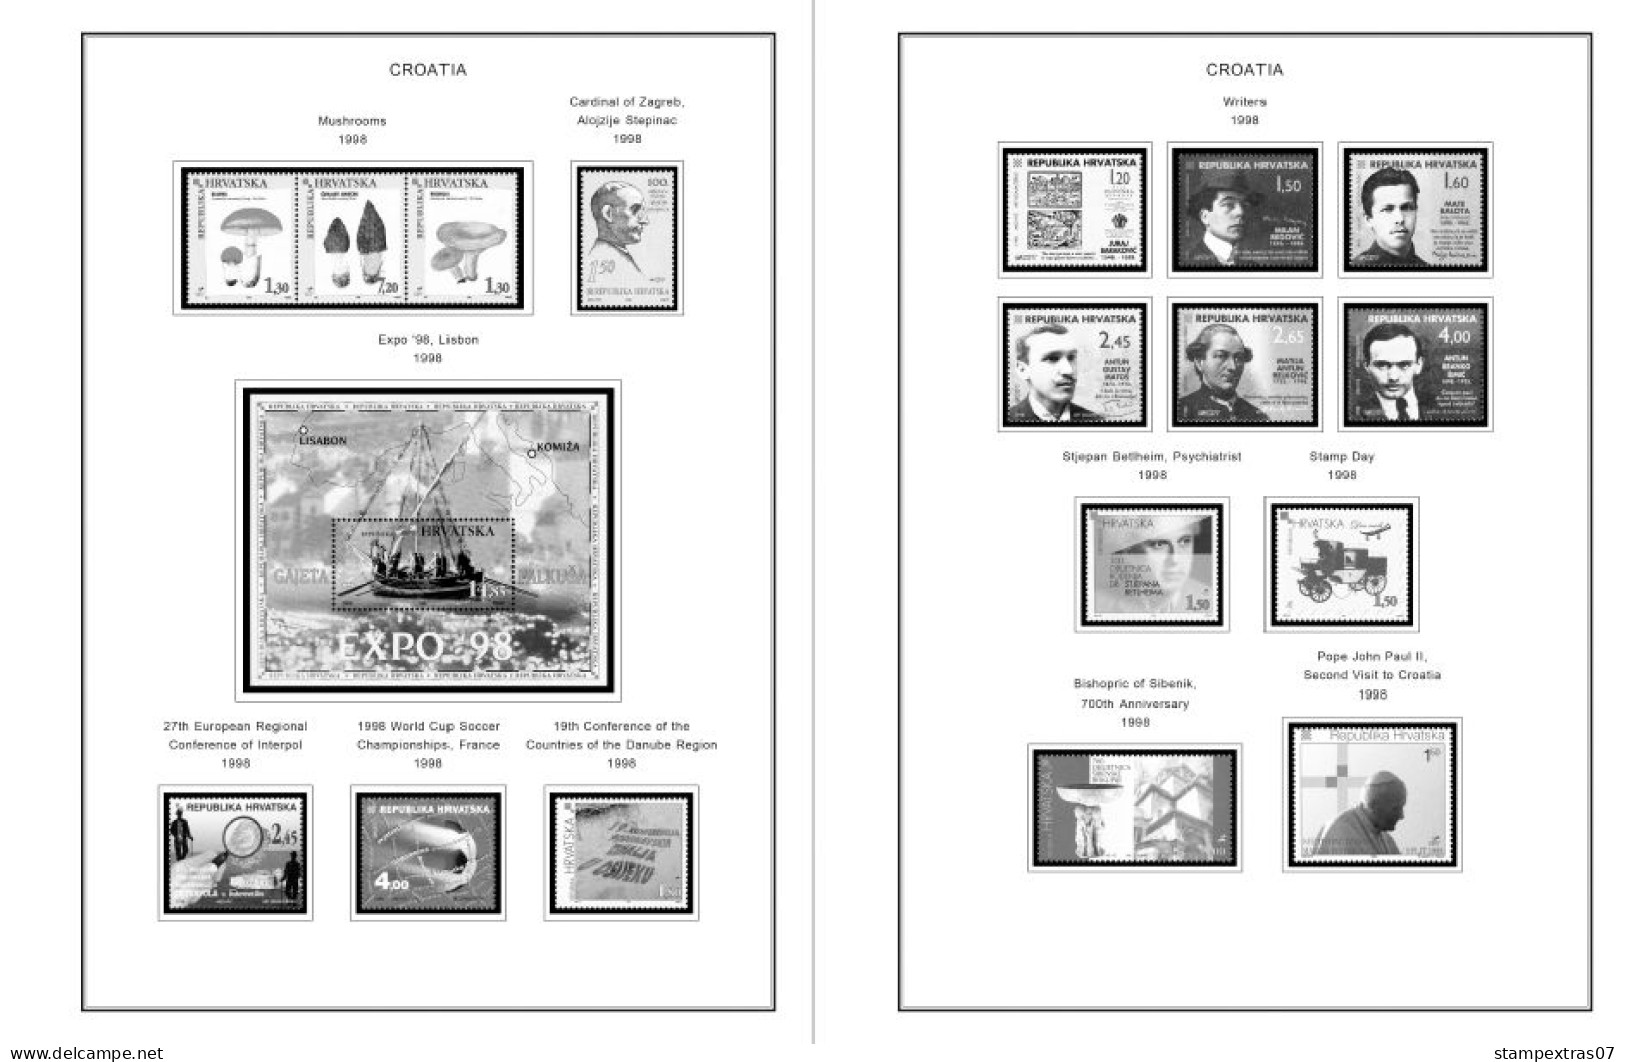 CROATIA 1991-2010 + 2011-2020 STAMP ALBUM PAGES (181 b&w illustrated pages)